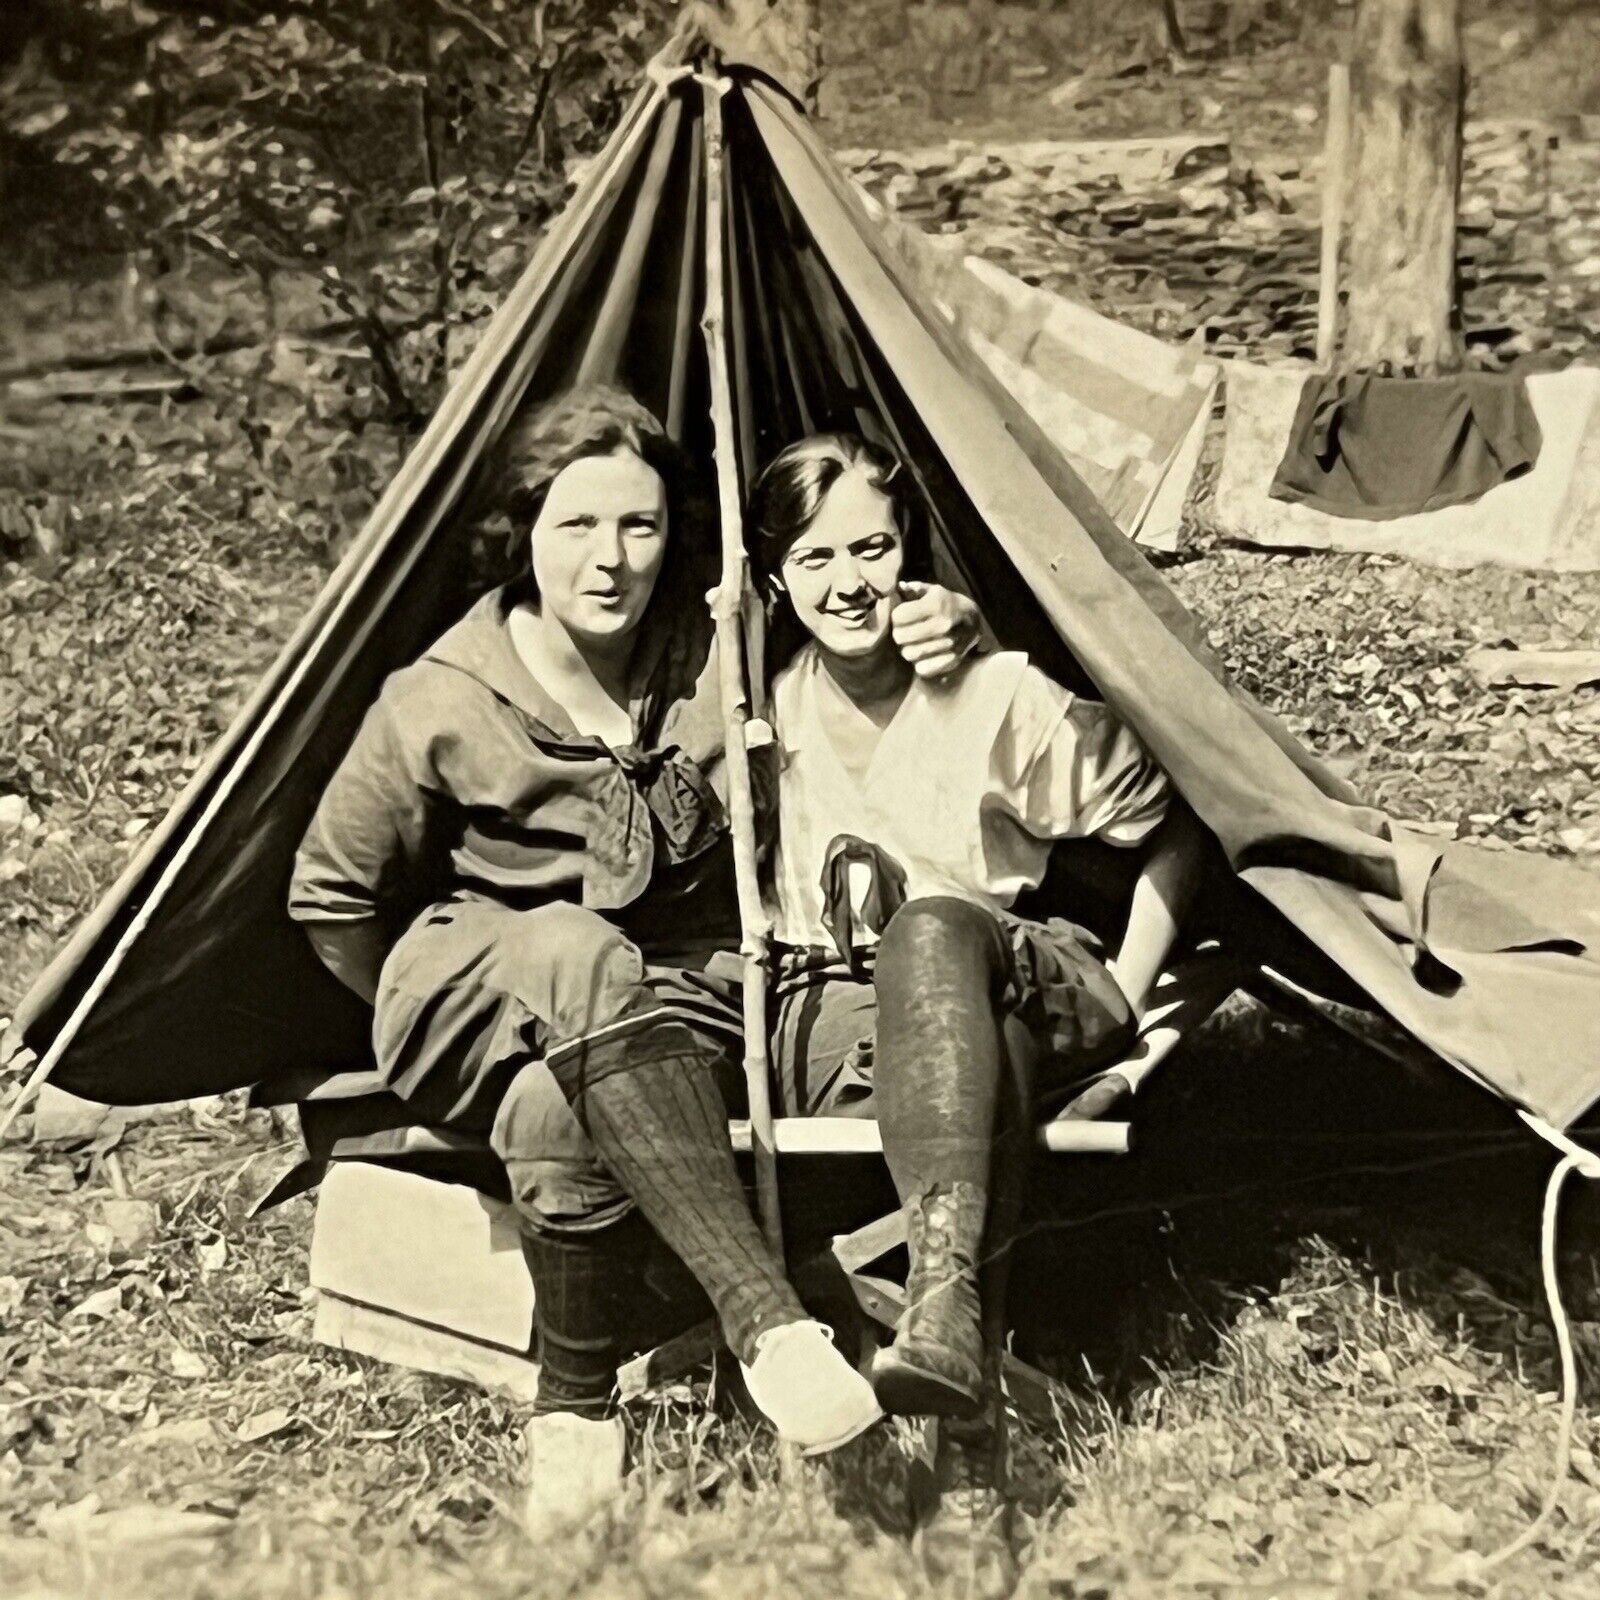 Vintage Snapshot Photograph Young Women Teen Girls On Camping Trip In Tent